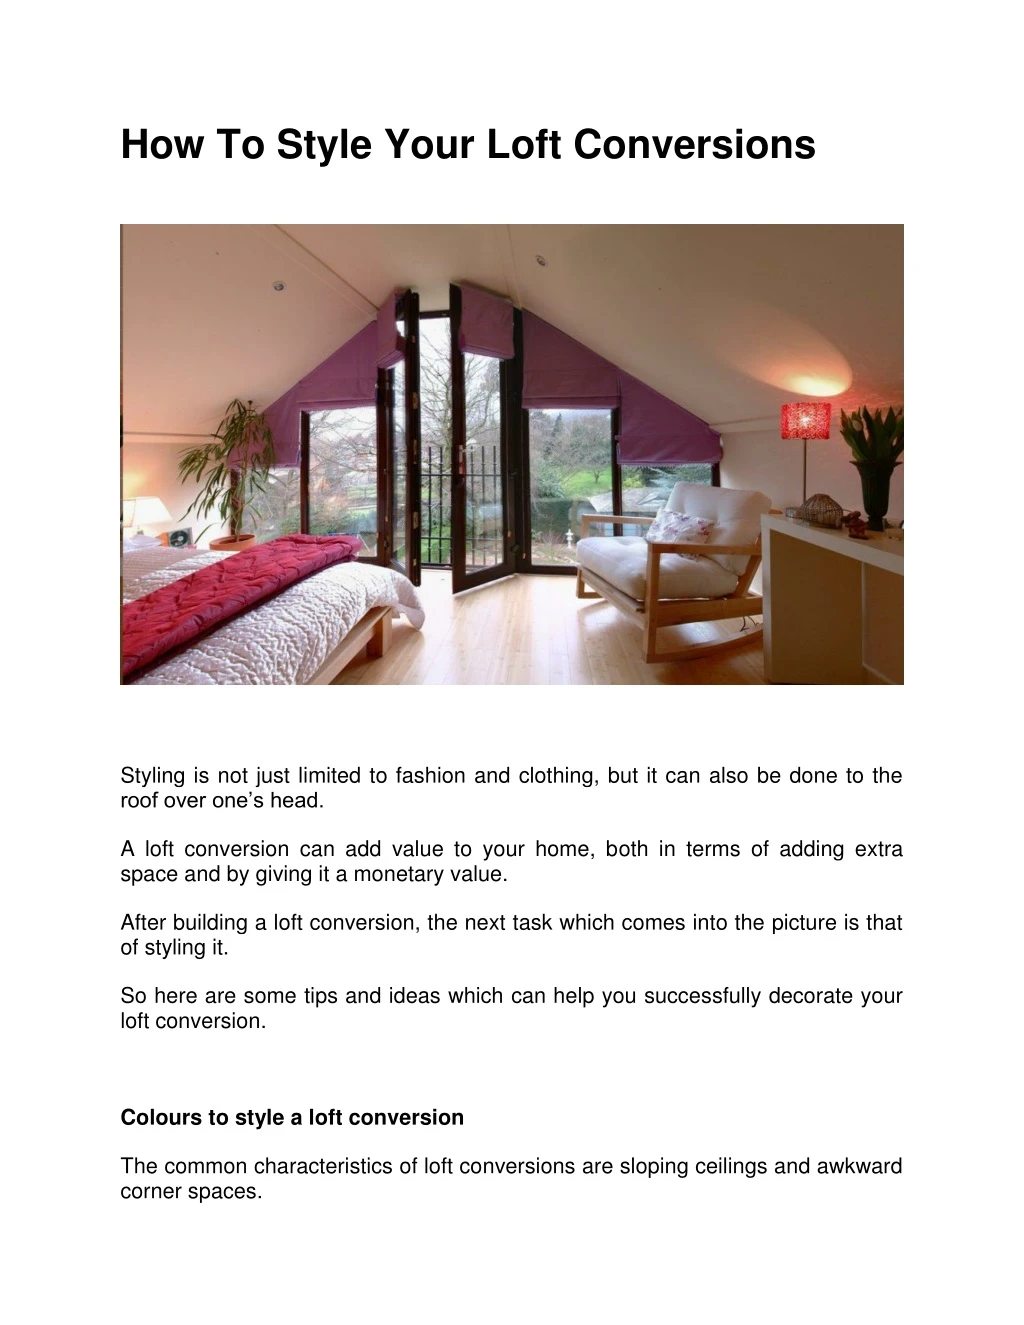 how to style your loft conversions